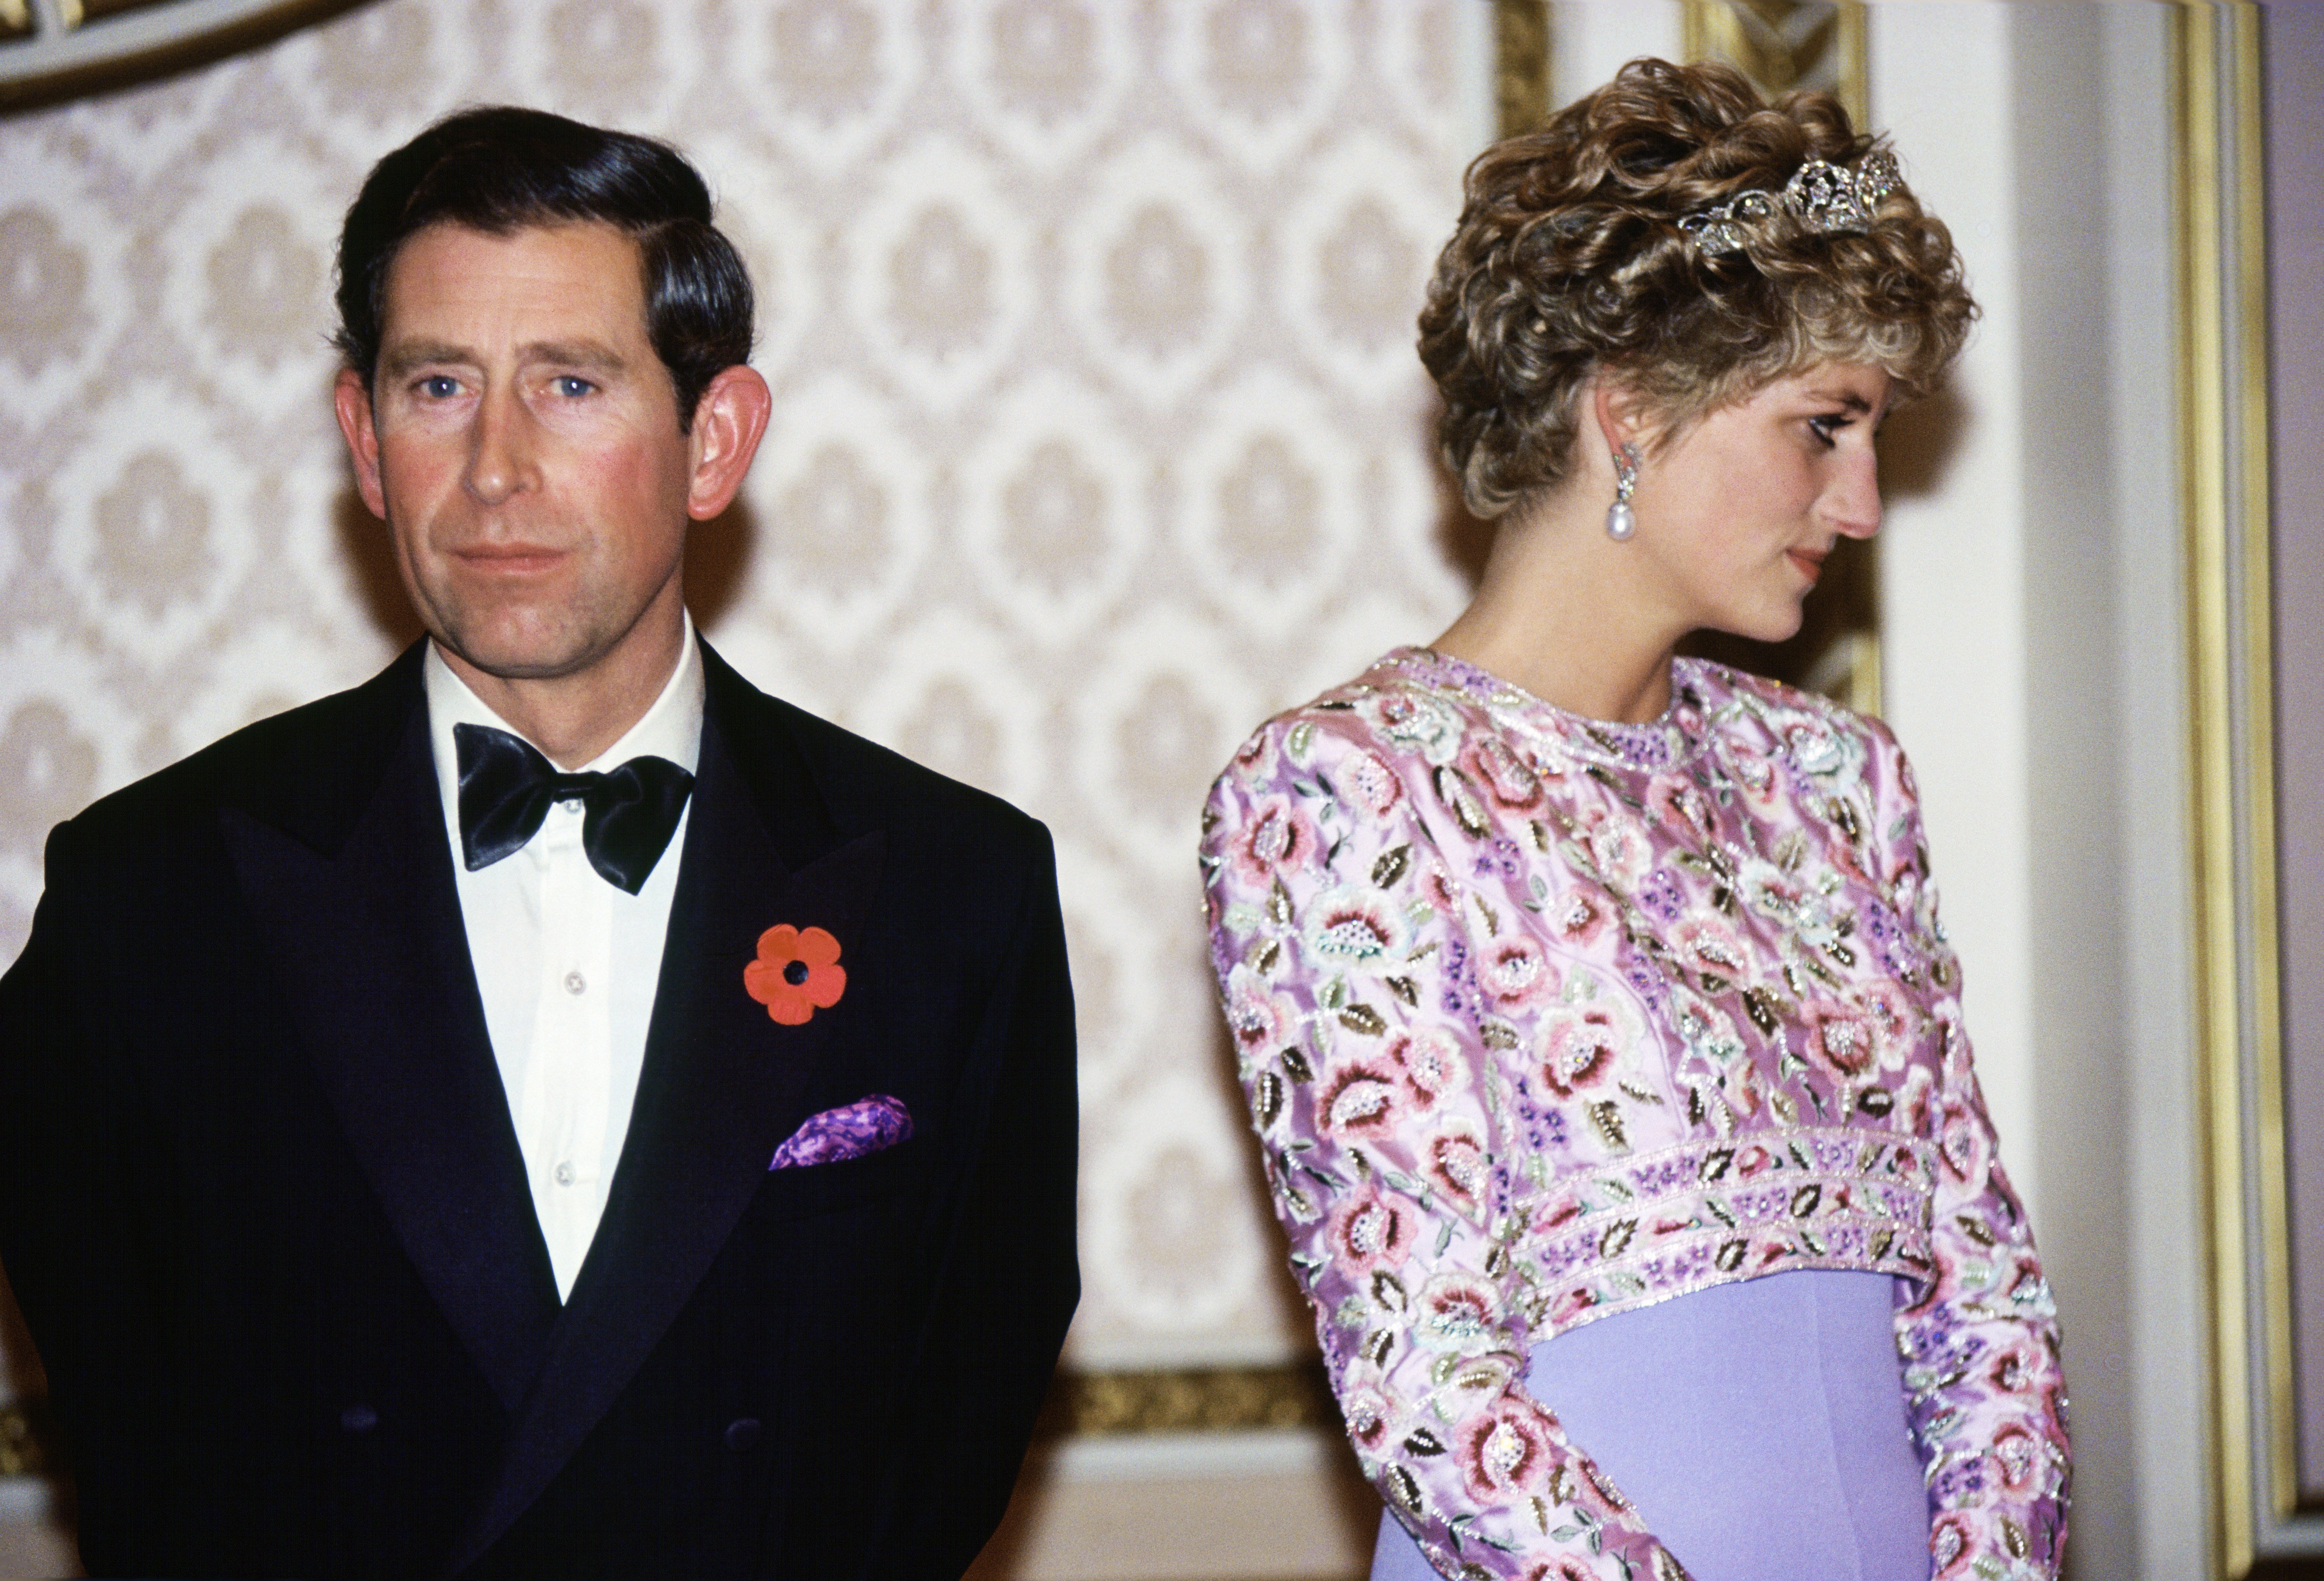 Prince Charles and his wife Princess Diana photographed on their last official trip together - a visit to the Republic of Korea. | Source: Getty Images